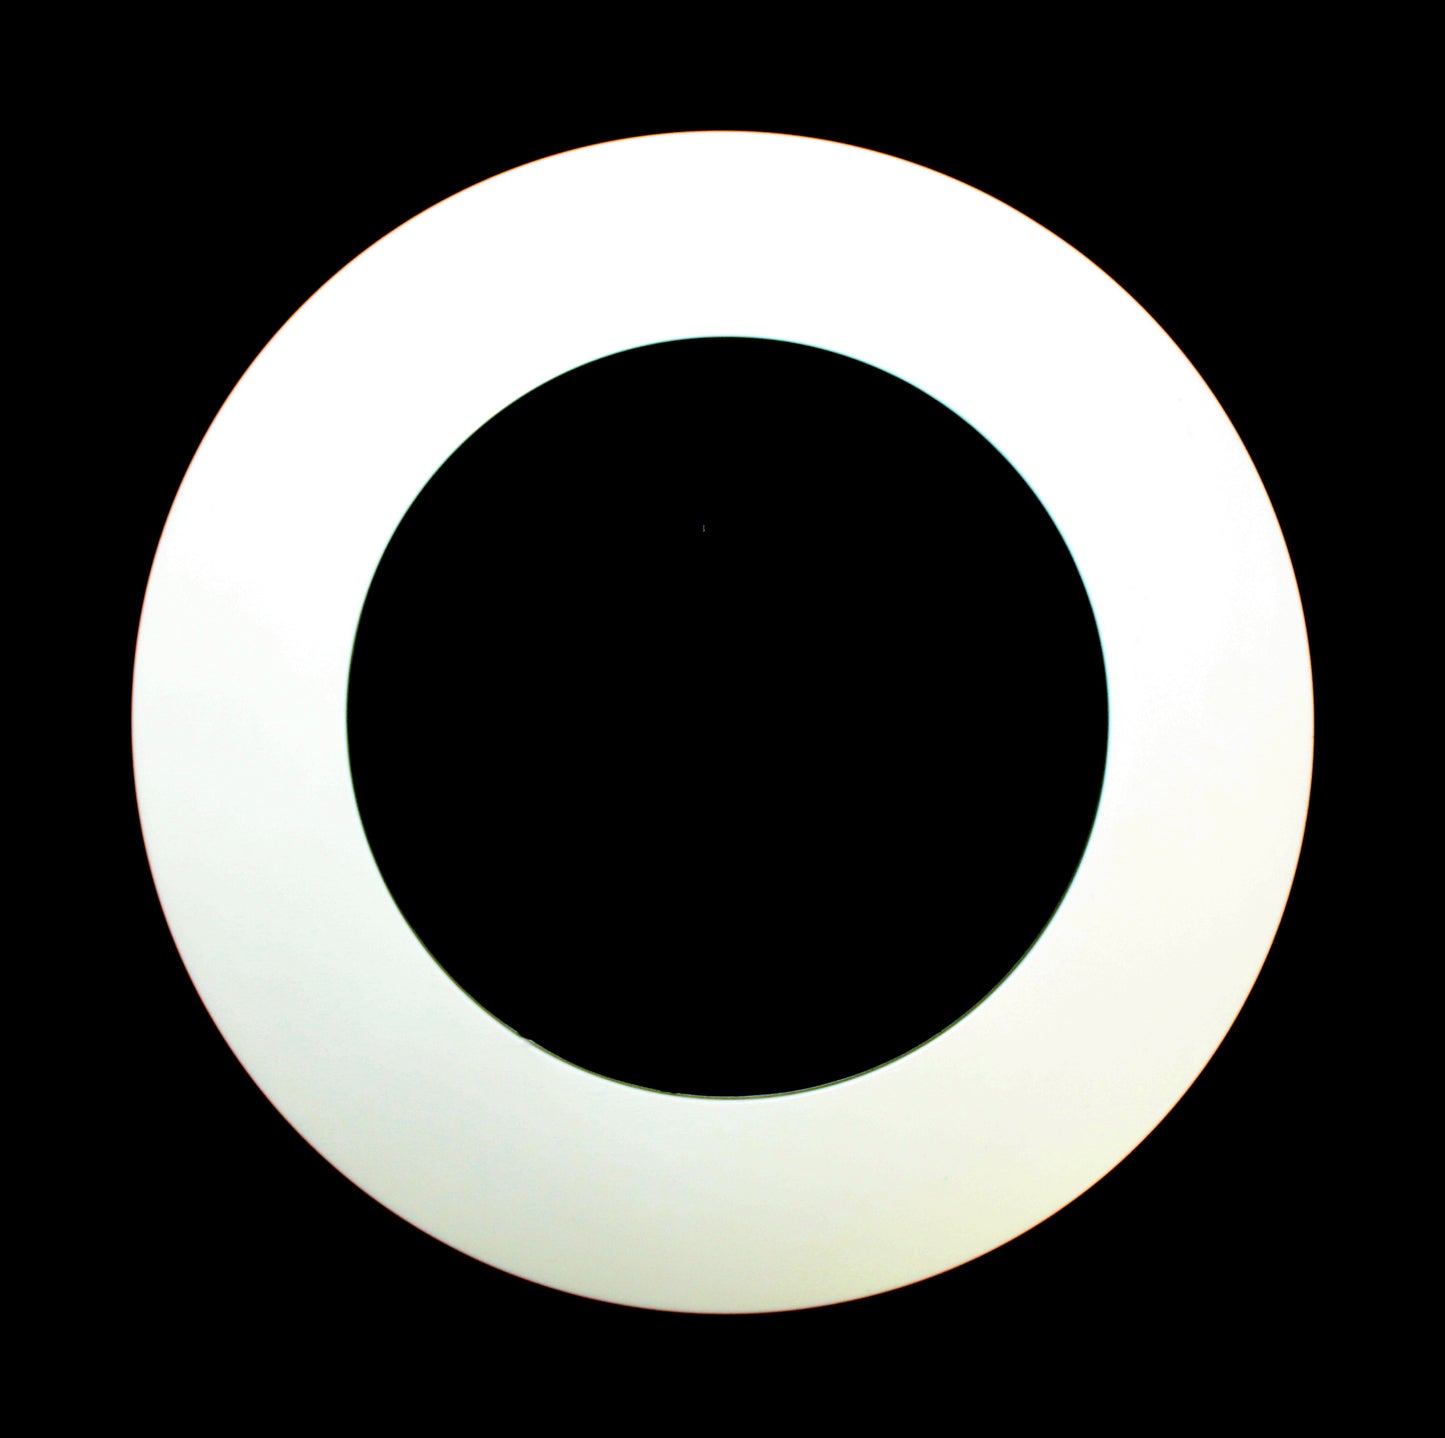 Plastic 4.25" Light Trim Goof Ring for 4" Inch Lighting Fixture Recessed Can - Multi-Colors Black or White